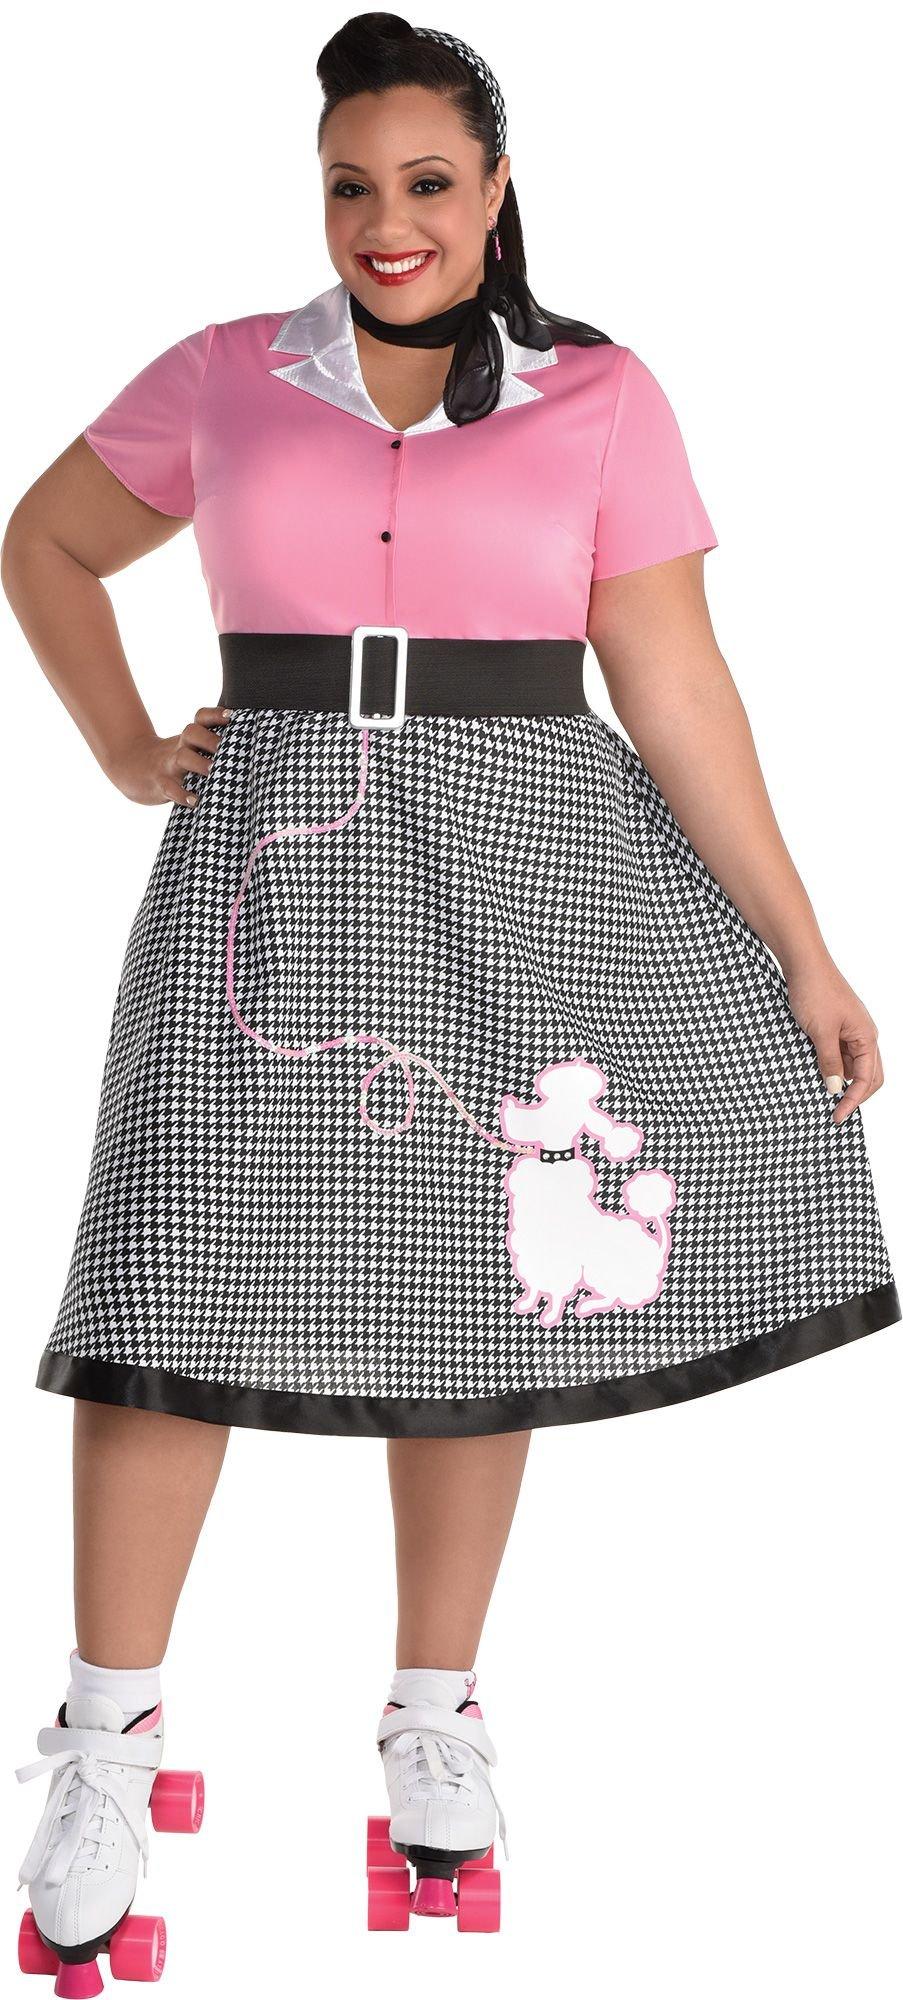 50s Costumes & Outfits for Women | Party City